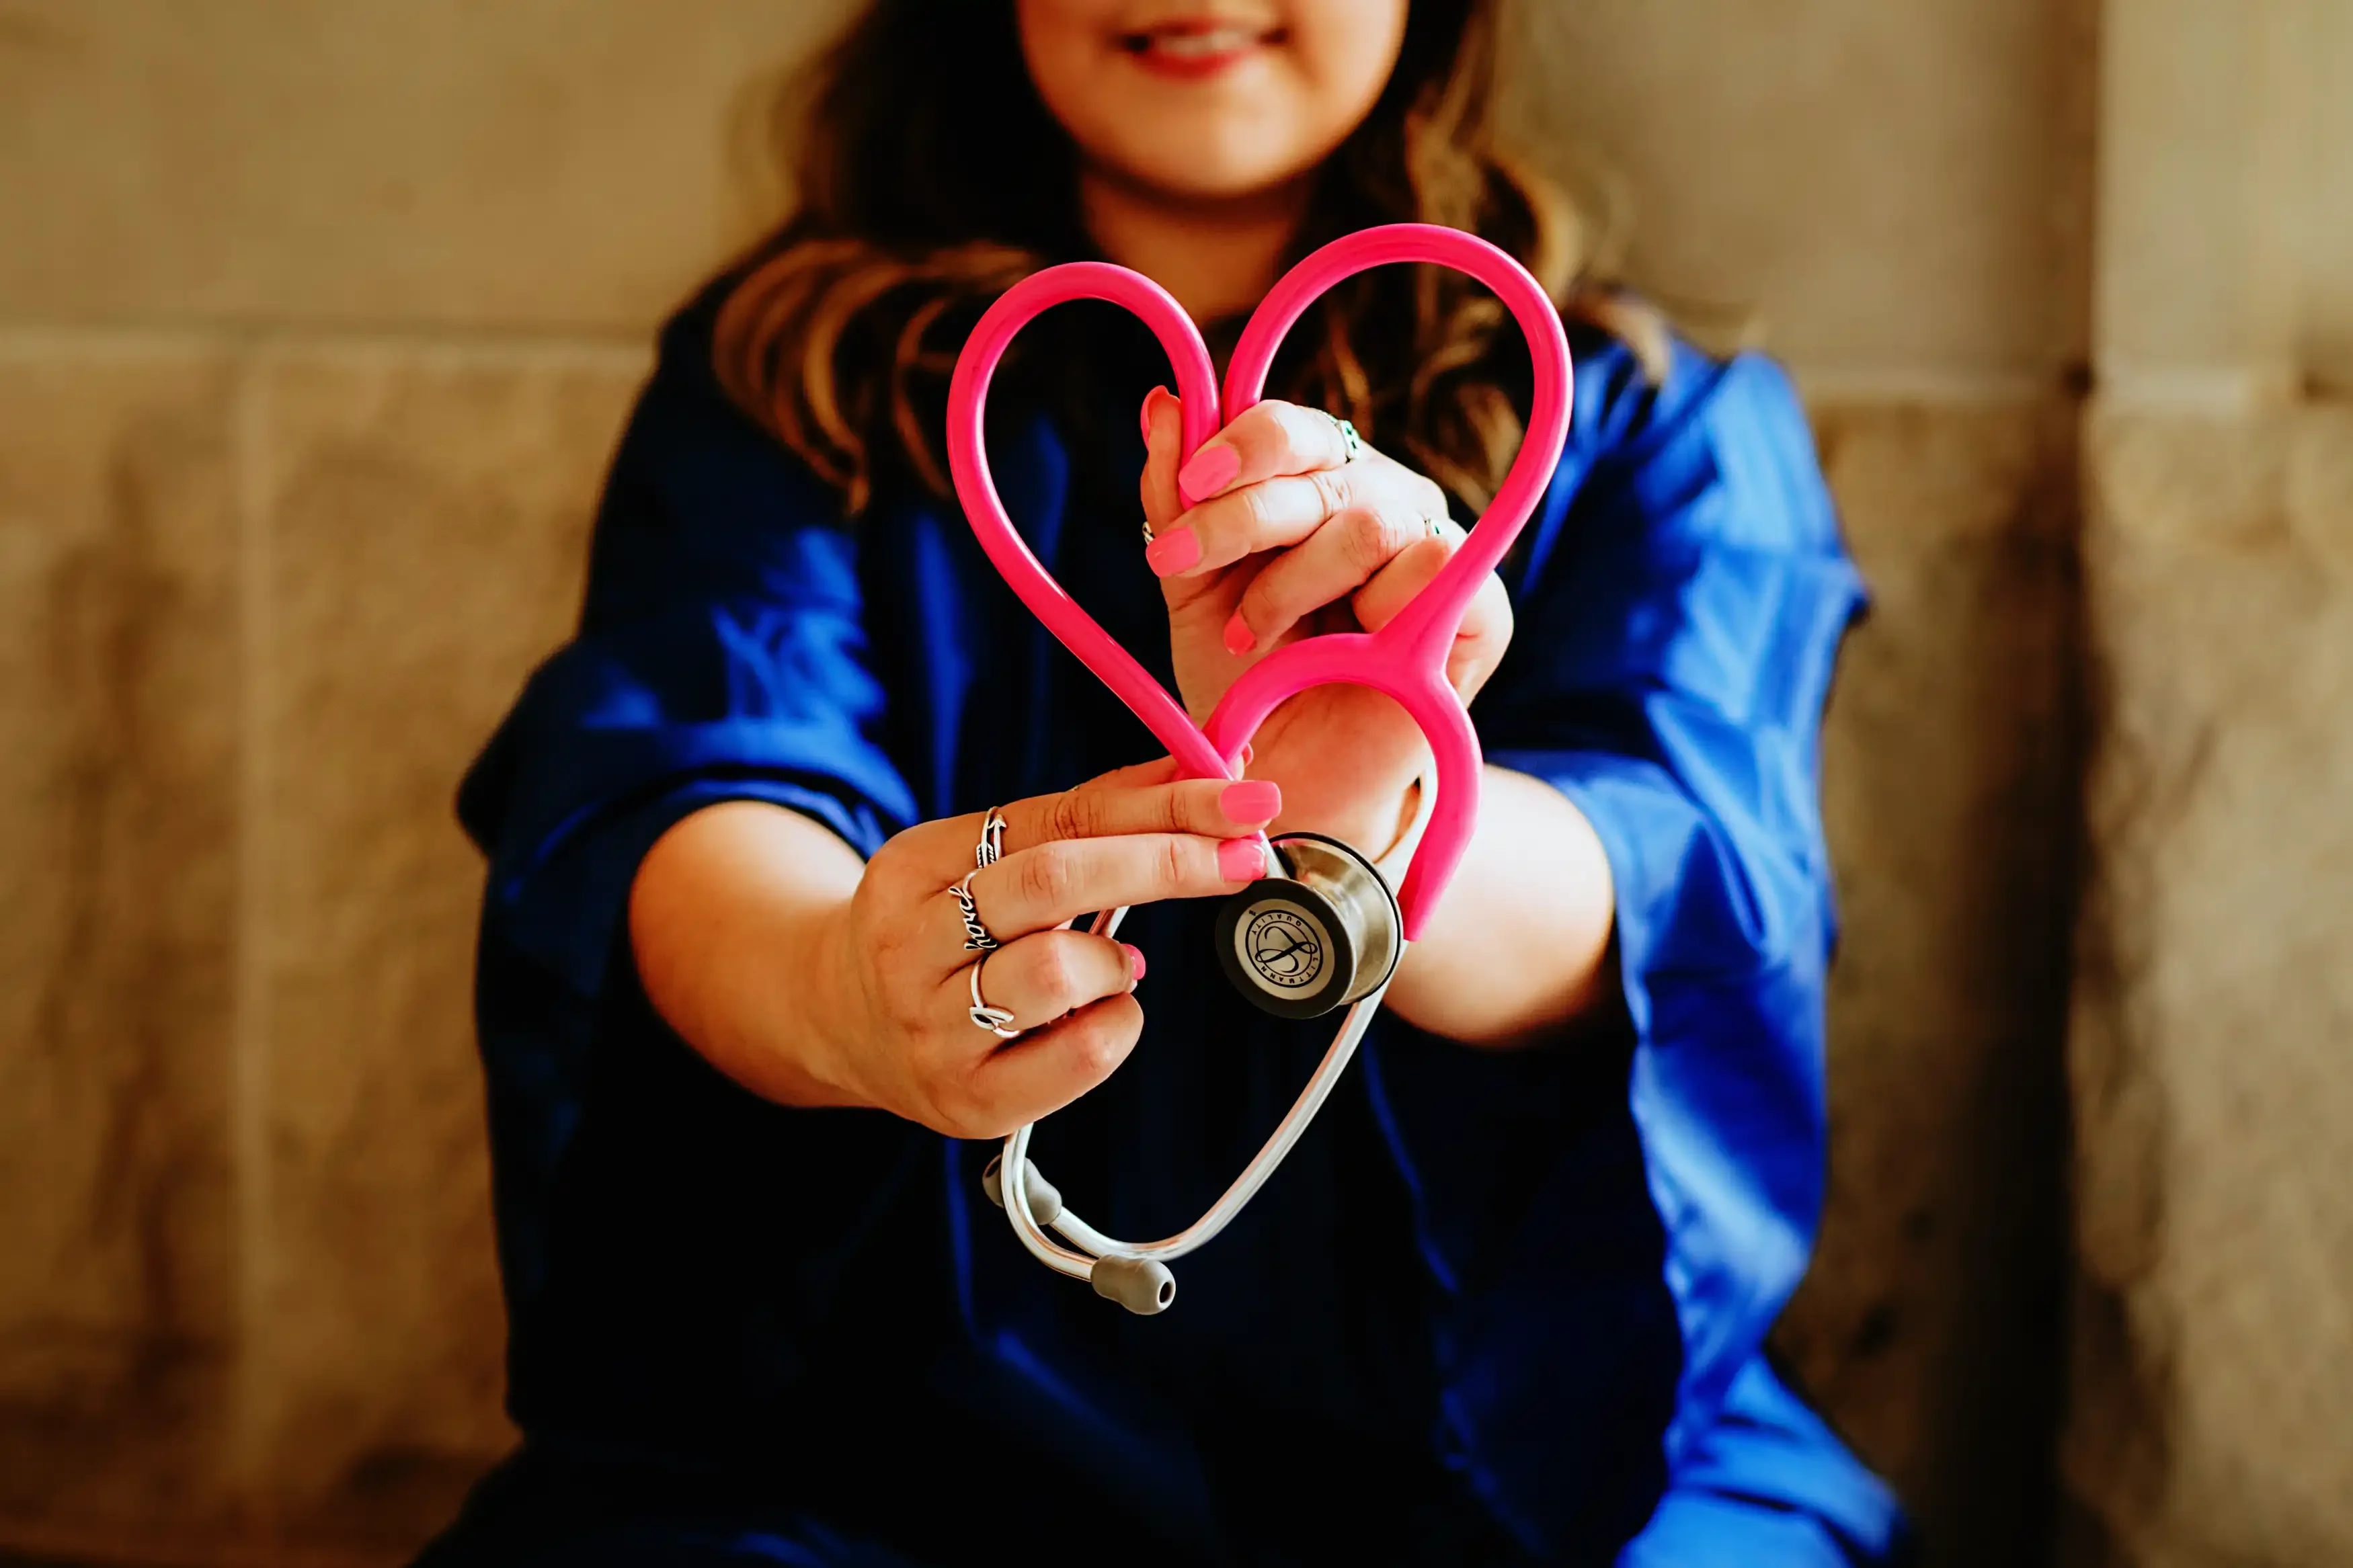 A nurse in blue scrubs holding a pink stethoscope in the shape of a heart.